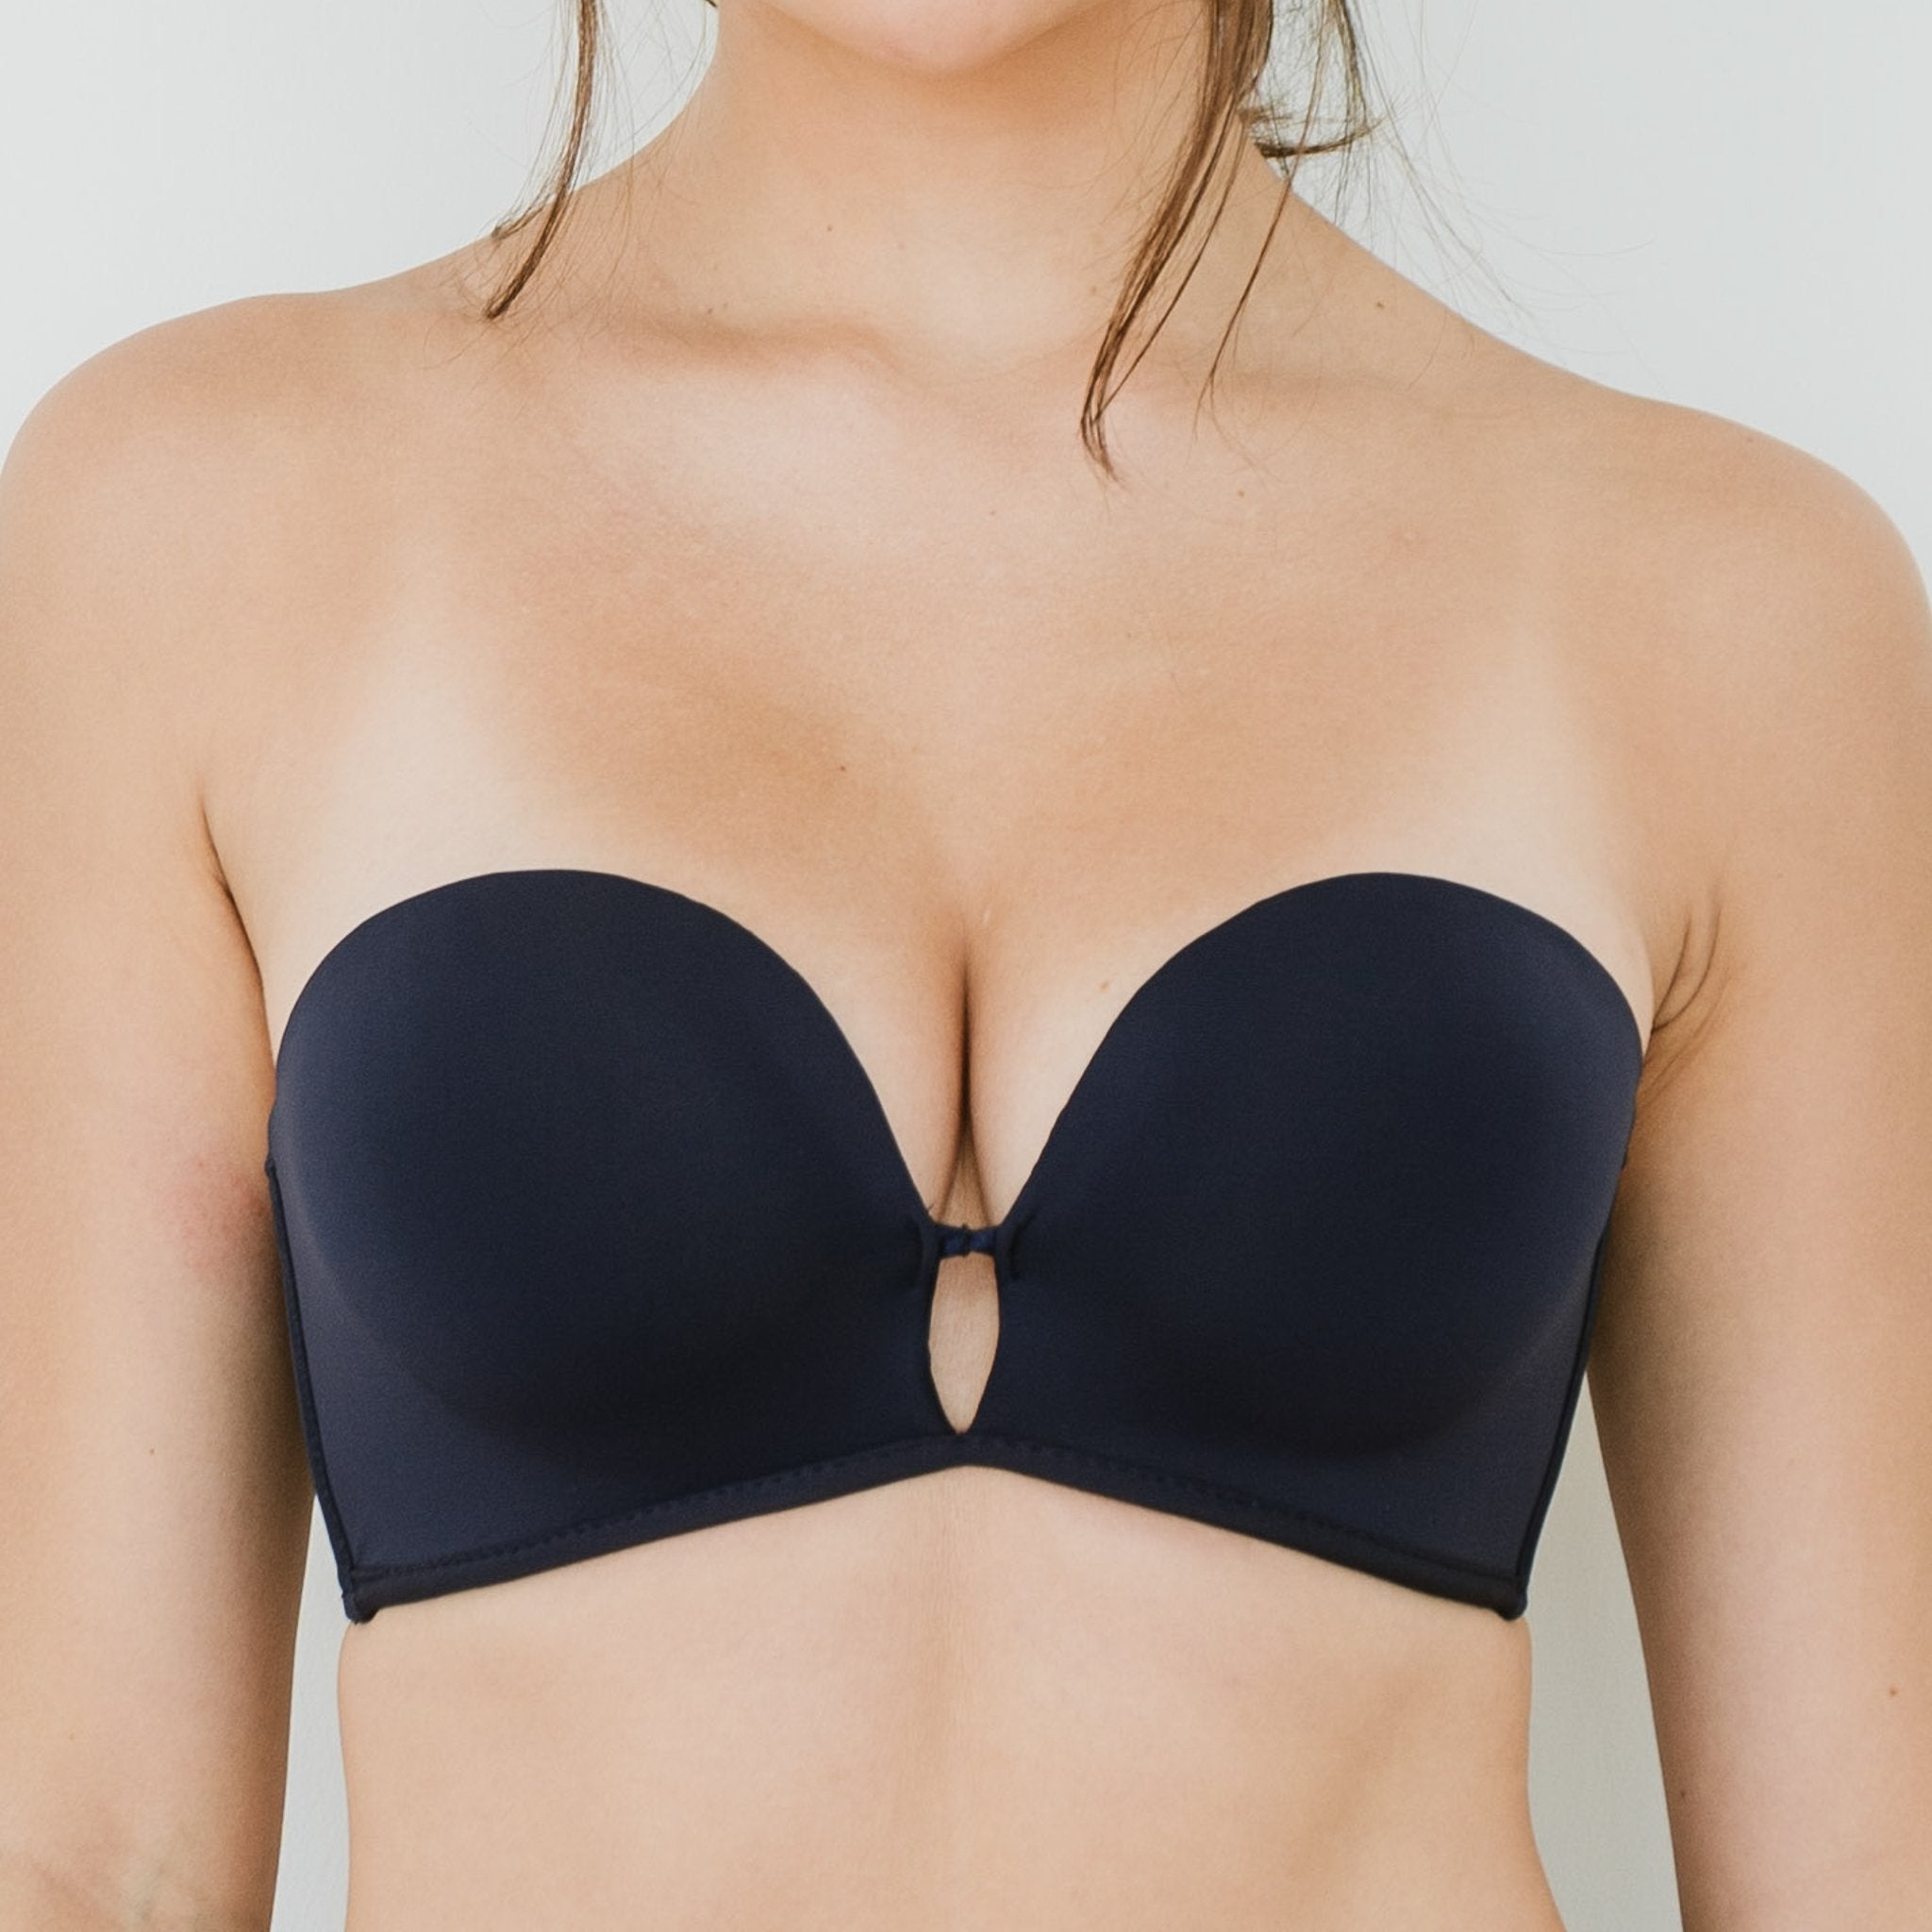 NEW! LIVE FREE! Lightly-Lined 100% Non-Slip Strapless Wireless Bra in  Tagged 34B/75B